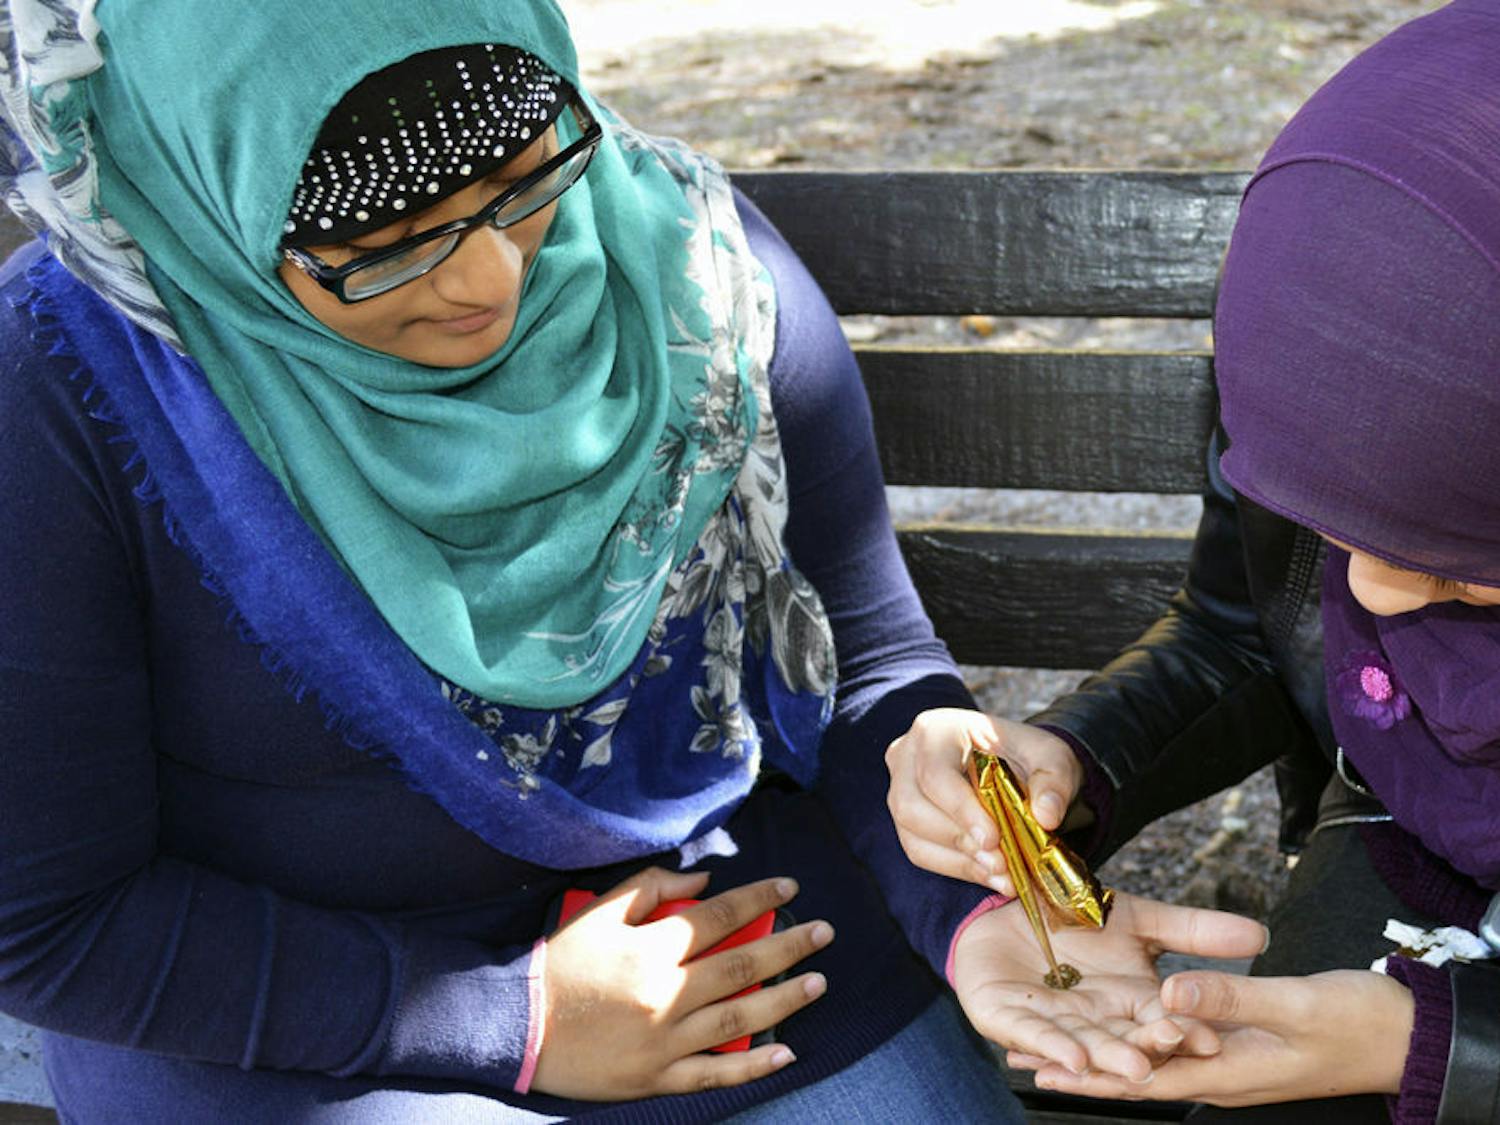 Najia Faddoul (left), a 19-year-old UF pre-pharmacy freshman, receives a henna tattoo from Sana Adalsha, a 19-year-old UF health science freshman, on Plaza of the Americas on Monday afternoon. Faddoul and Adalsha were offering henna tattoos to students to raise money for an event for high-schoolers in Orlando.